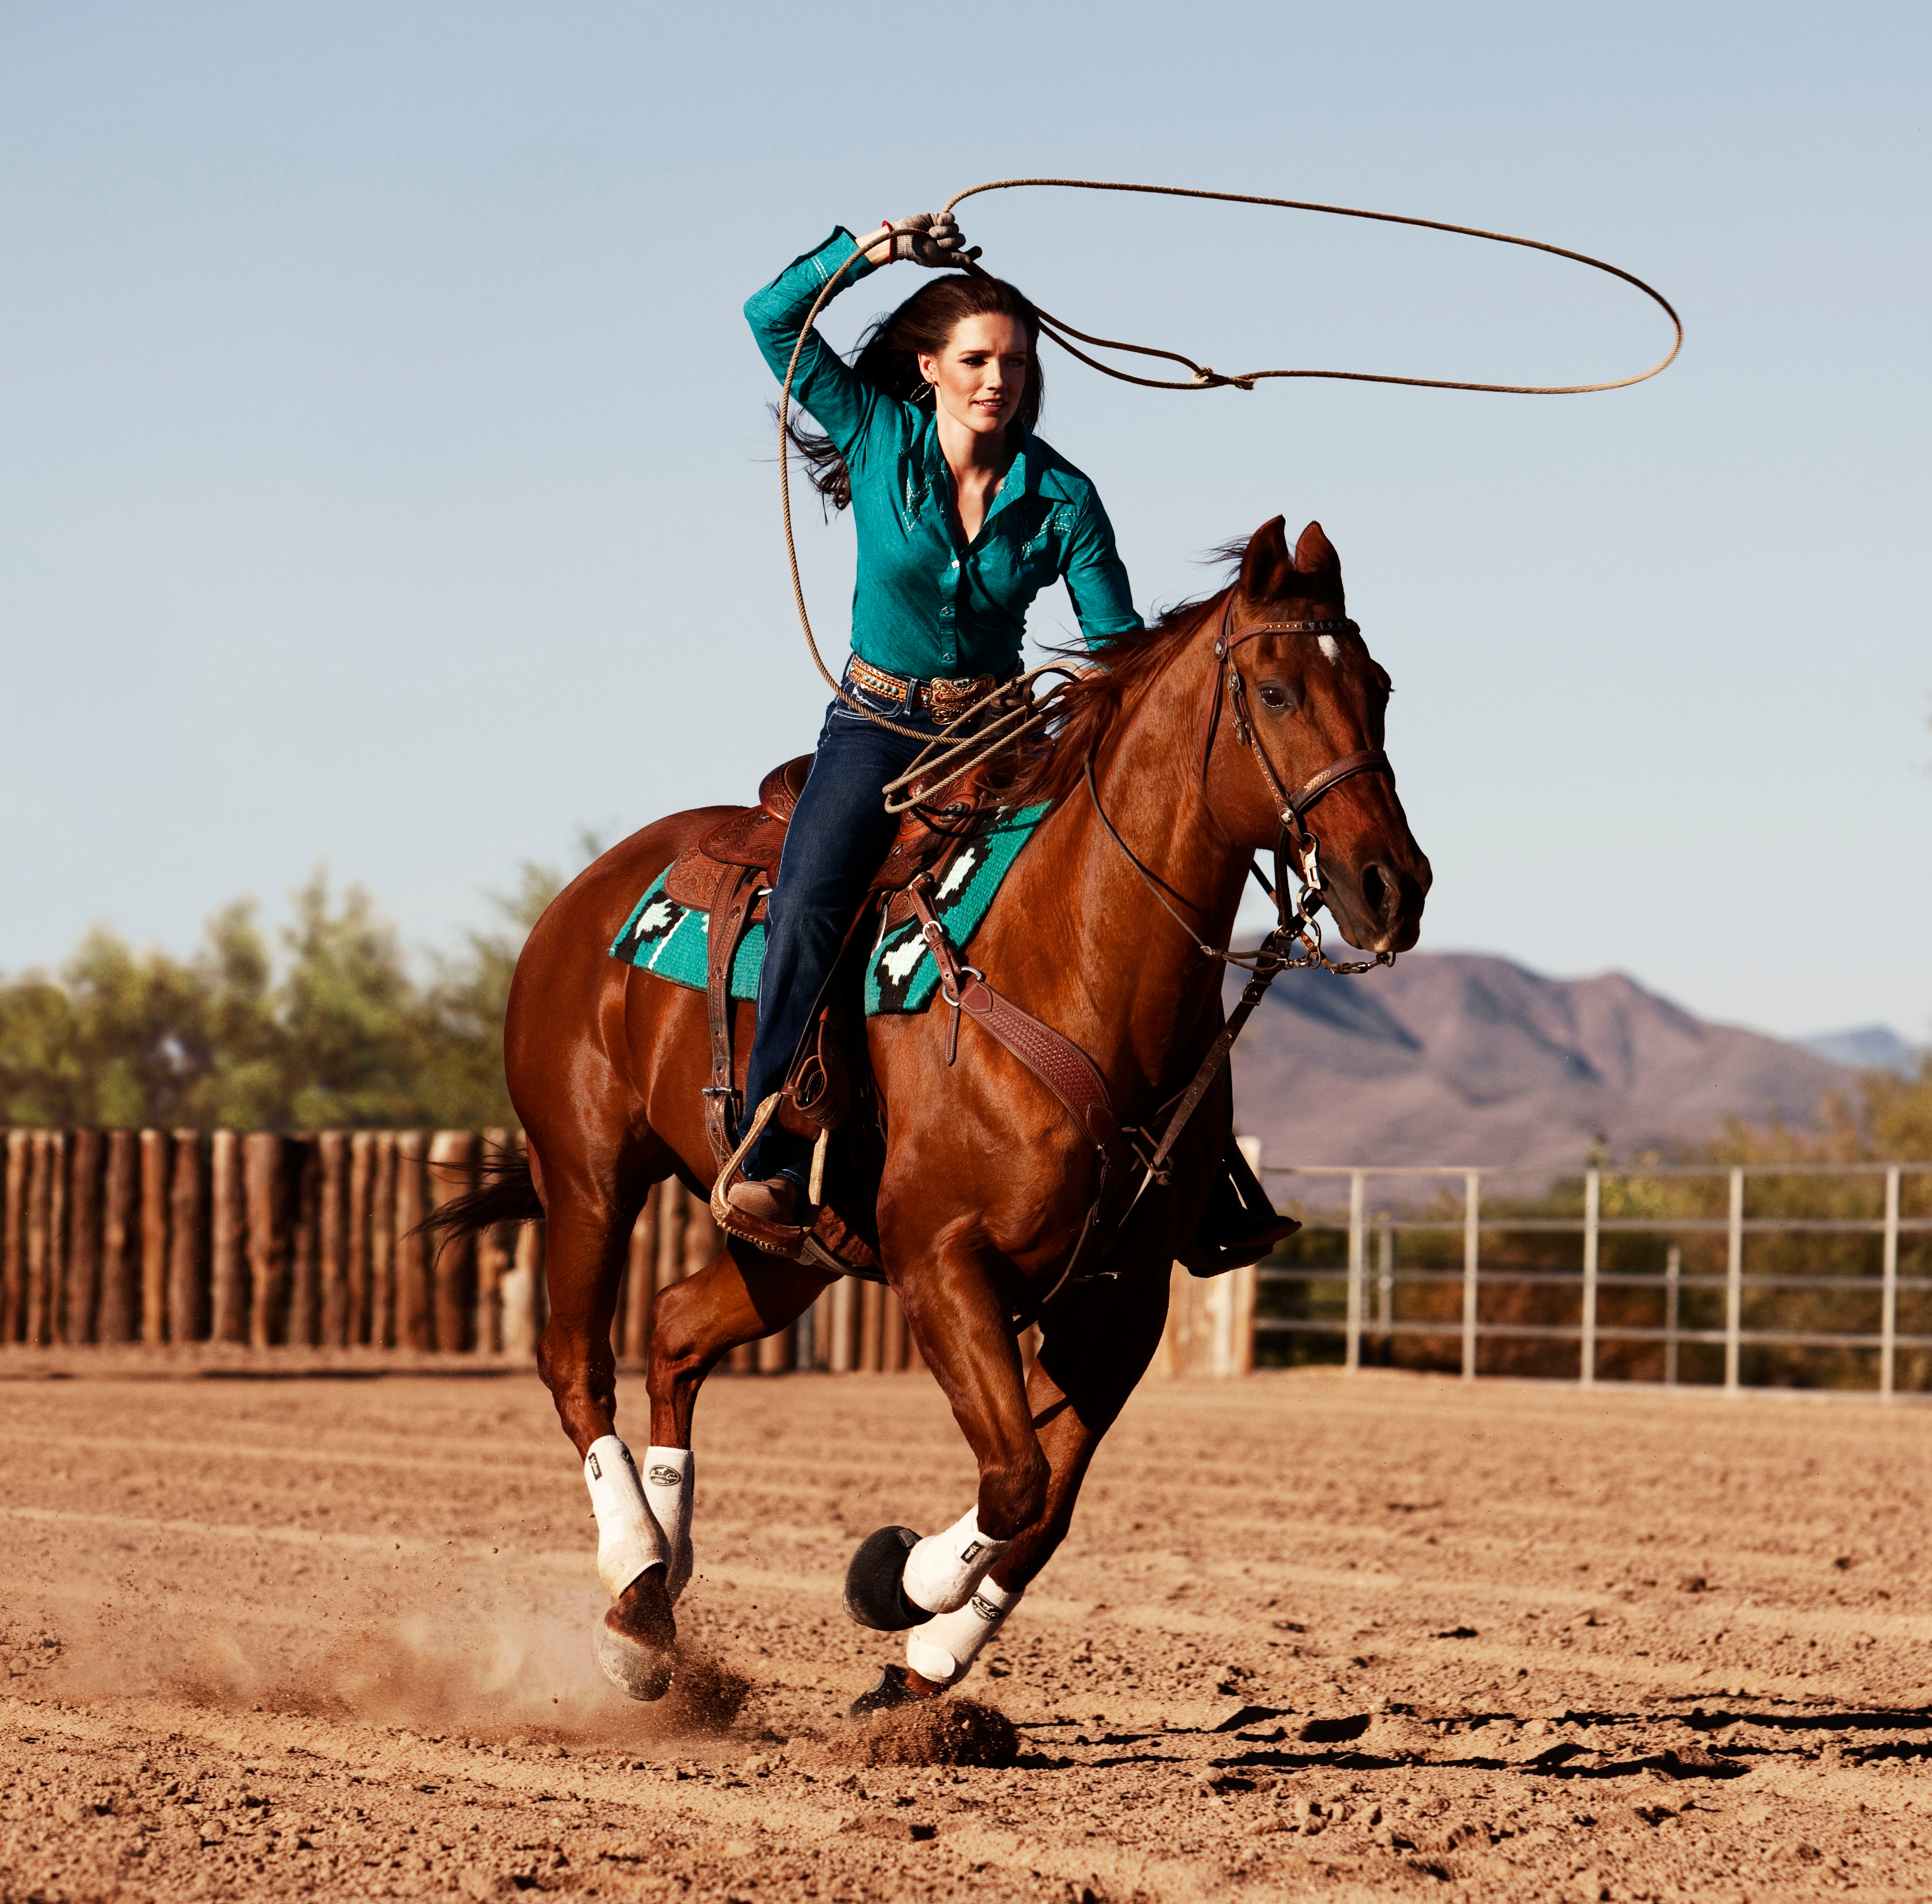 78 Best images about Cowgirl roping on Pinterest July 15, Facebook and Mile...